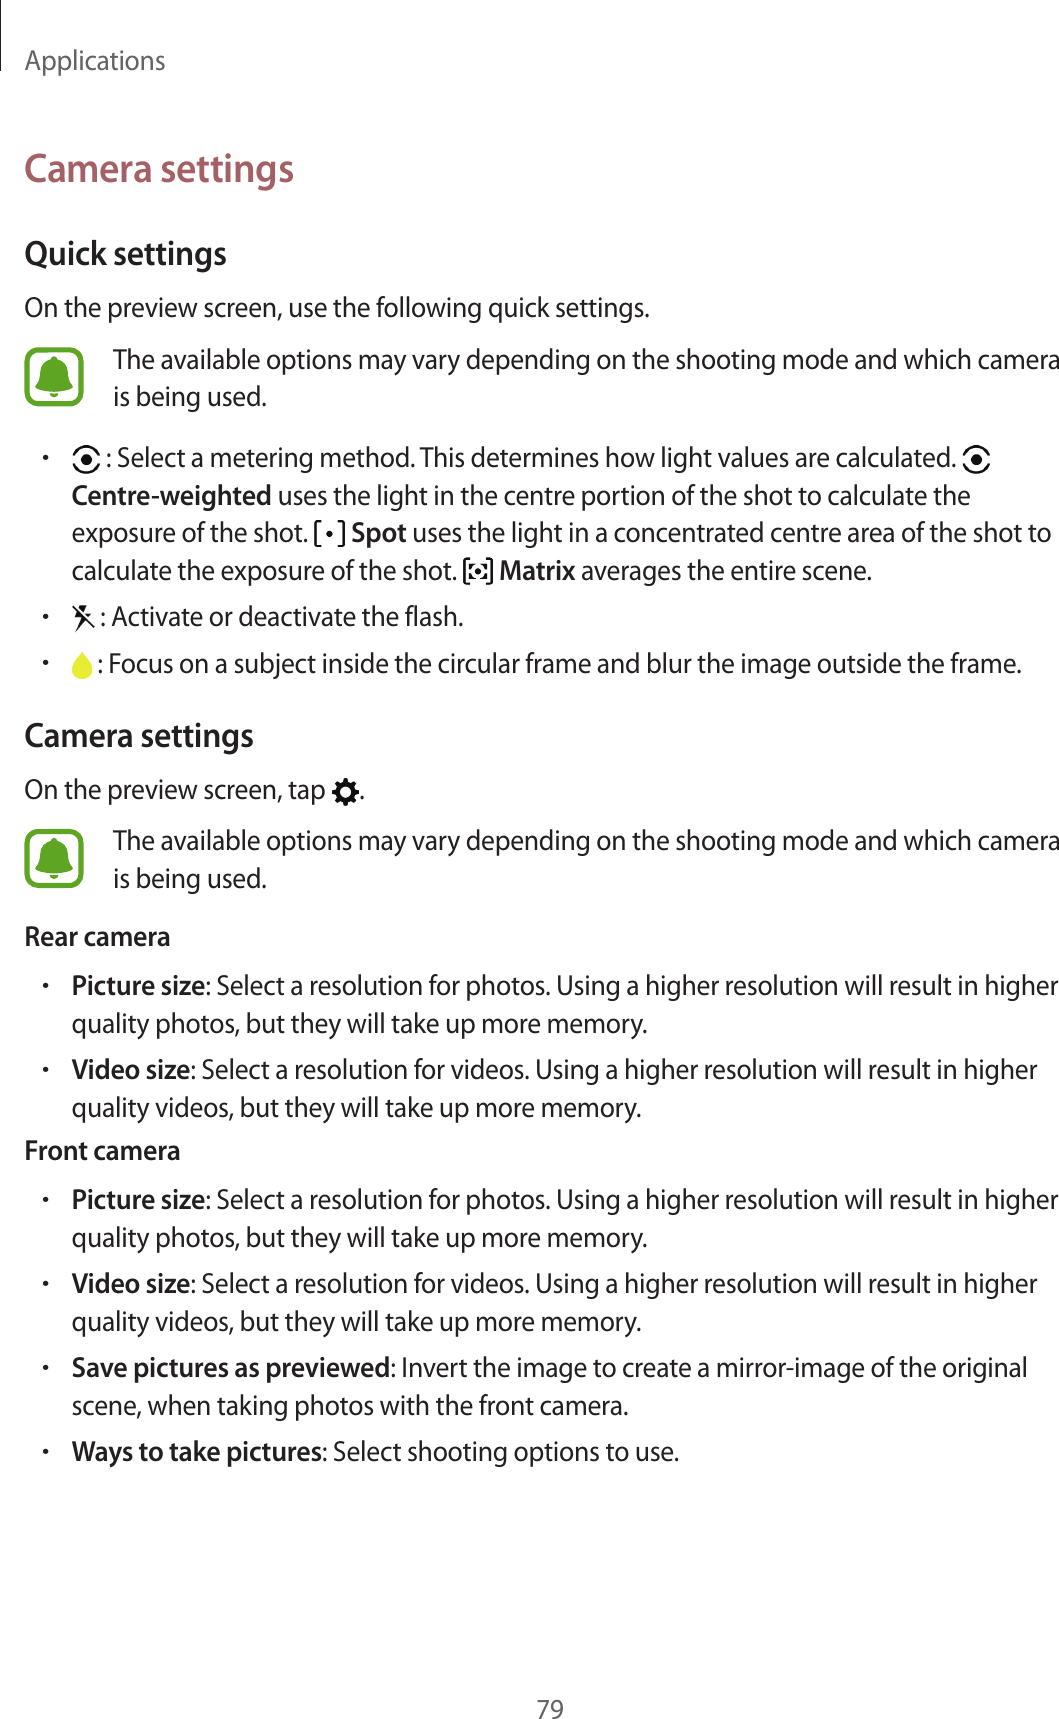 Applications79Camera settingsQuick settingsOn the preview screen, use the following quick settings.The available options may vary depending on the shooting mode and which camera is being used.• : Select a metering method. This determines how light values are calculated.   Centre-weighted uses the light in the centre portion of the shot to calculate the exposure of the shot.   Spot uses the light in a concentrated centre area of the shot to calculate the exposure of the shot.   Matrix averages the entire scene.• : Activate or deactivate the flash.• : Focus on a subject inside the circular frame and blur the image outside the frame.Camera settingsOn the preview screen, tap  .The available options may vary depending on the shooting mode and which camera is being used.Rear camera•Picture size: Select a resolution for photos. Using a higher resolution will result in higher quality photos, but they will take up more memory.•Video size: Select a resolution for videos. Using a higher resolution will result in higher quality videos, but they will take up more memory.Front camera•Picture size: Select a resolution for photos. Using a higher resolution will result in higher quality photos, but they will take up more memory.•Video size: Select a resolution for videos. Using a higher resolution will result in higher quality videos, but they will take up more memory.•Save pictures as previewed: Invert the image to create a mirror-image of the original scene, when taking photos with the front camera.•Ways to take pictures: Select shooting options to use.